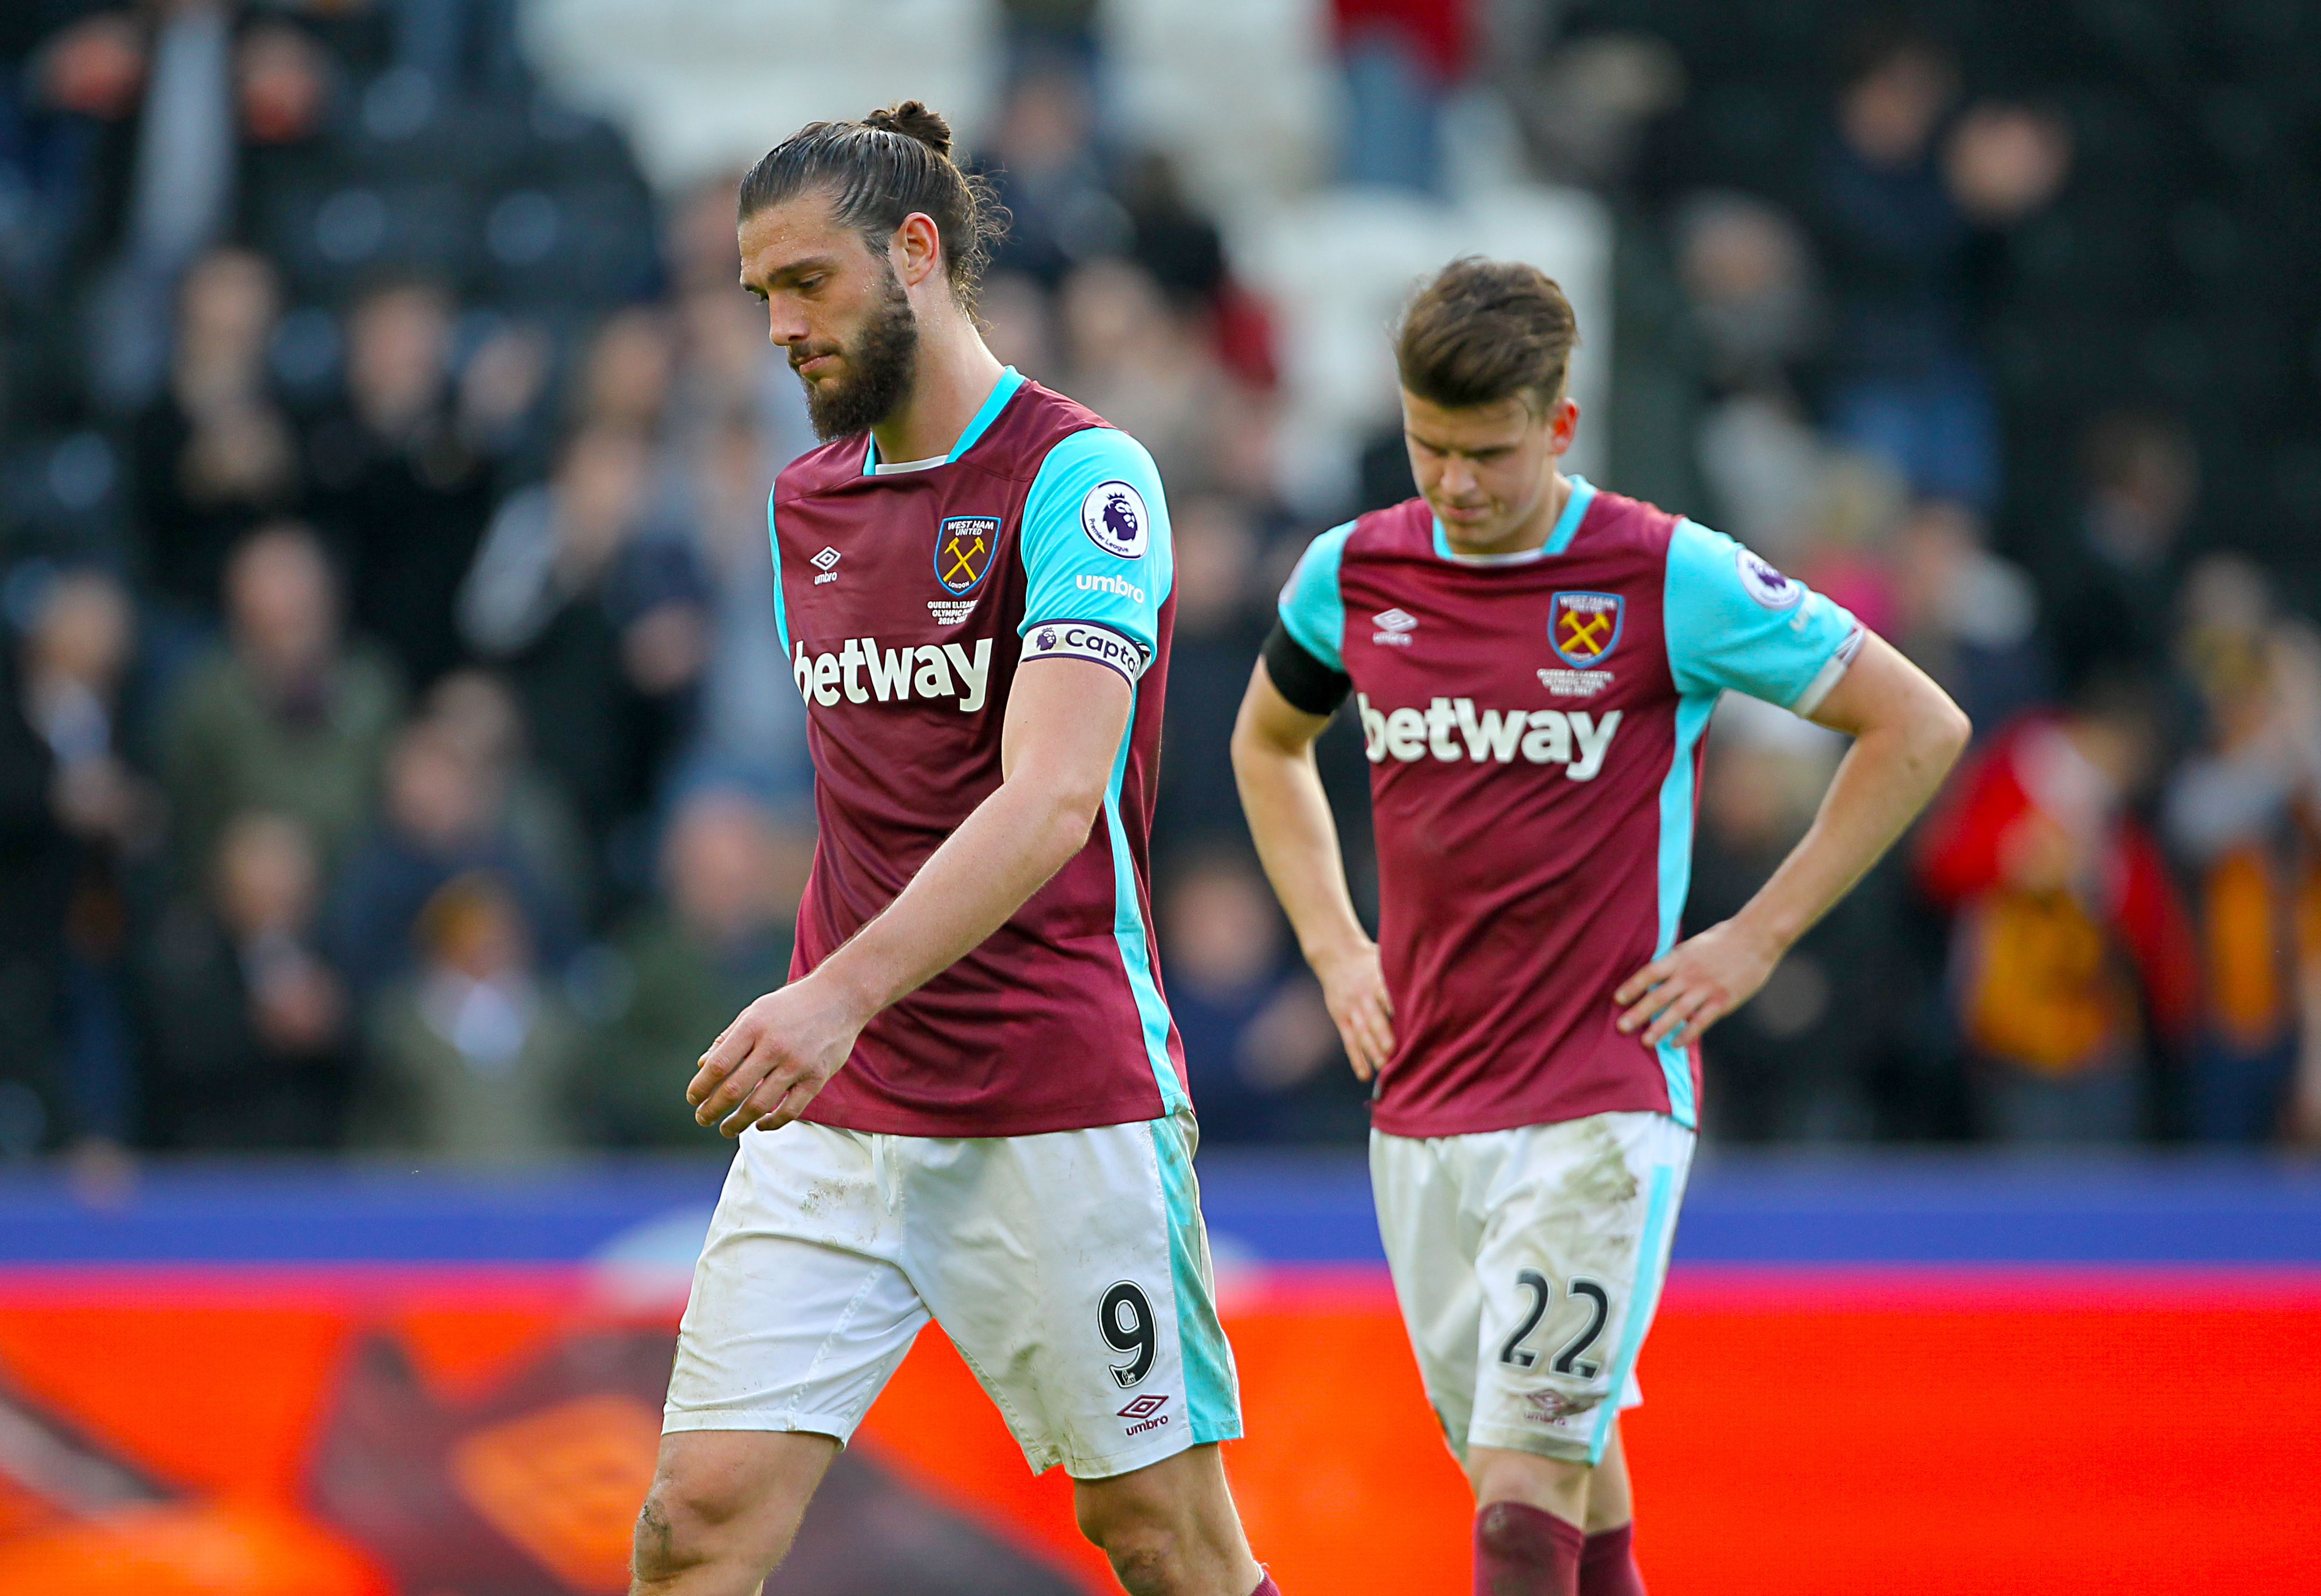 West Ham United's Andy Carroll is set for surgery